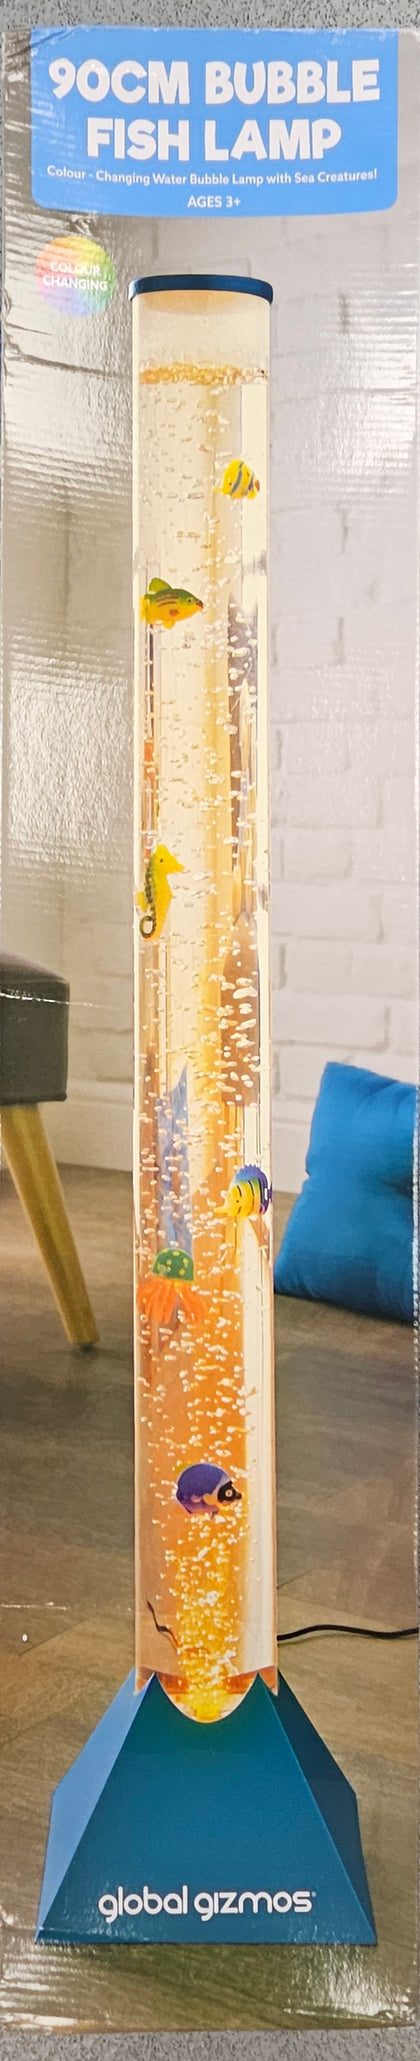 GLOBAL GIZMOS 90CM BUBBLE FISH LAMP LEIGH STORE